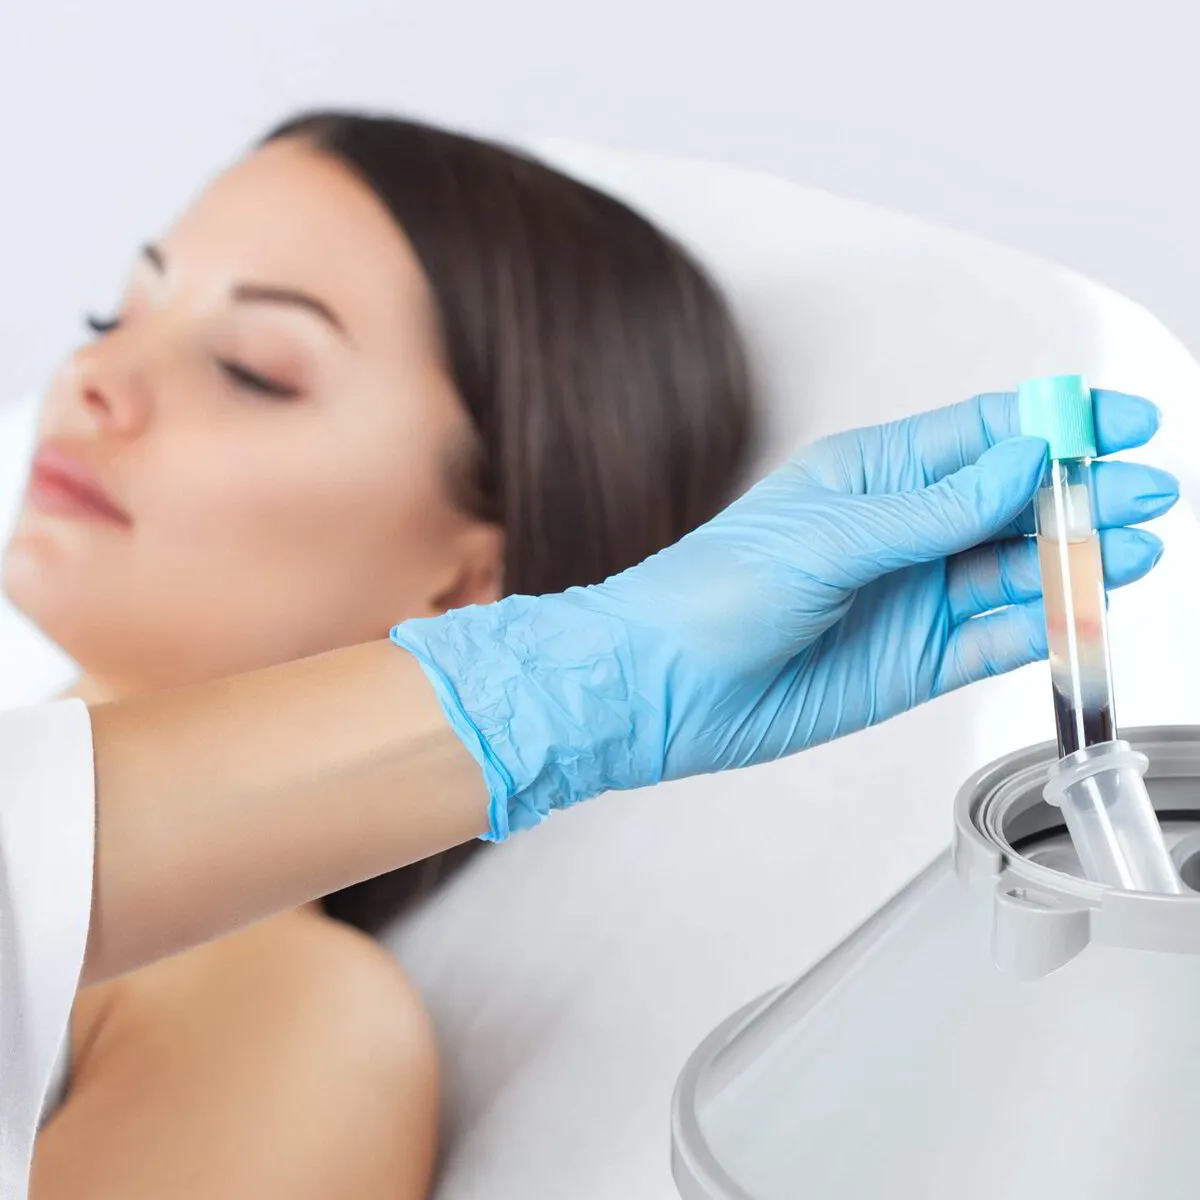 How long do PRP facial injections last?